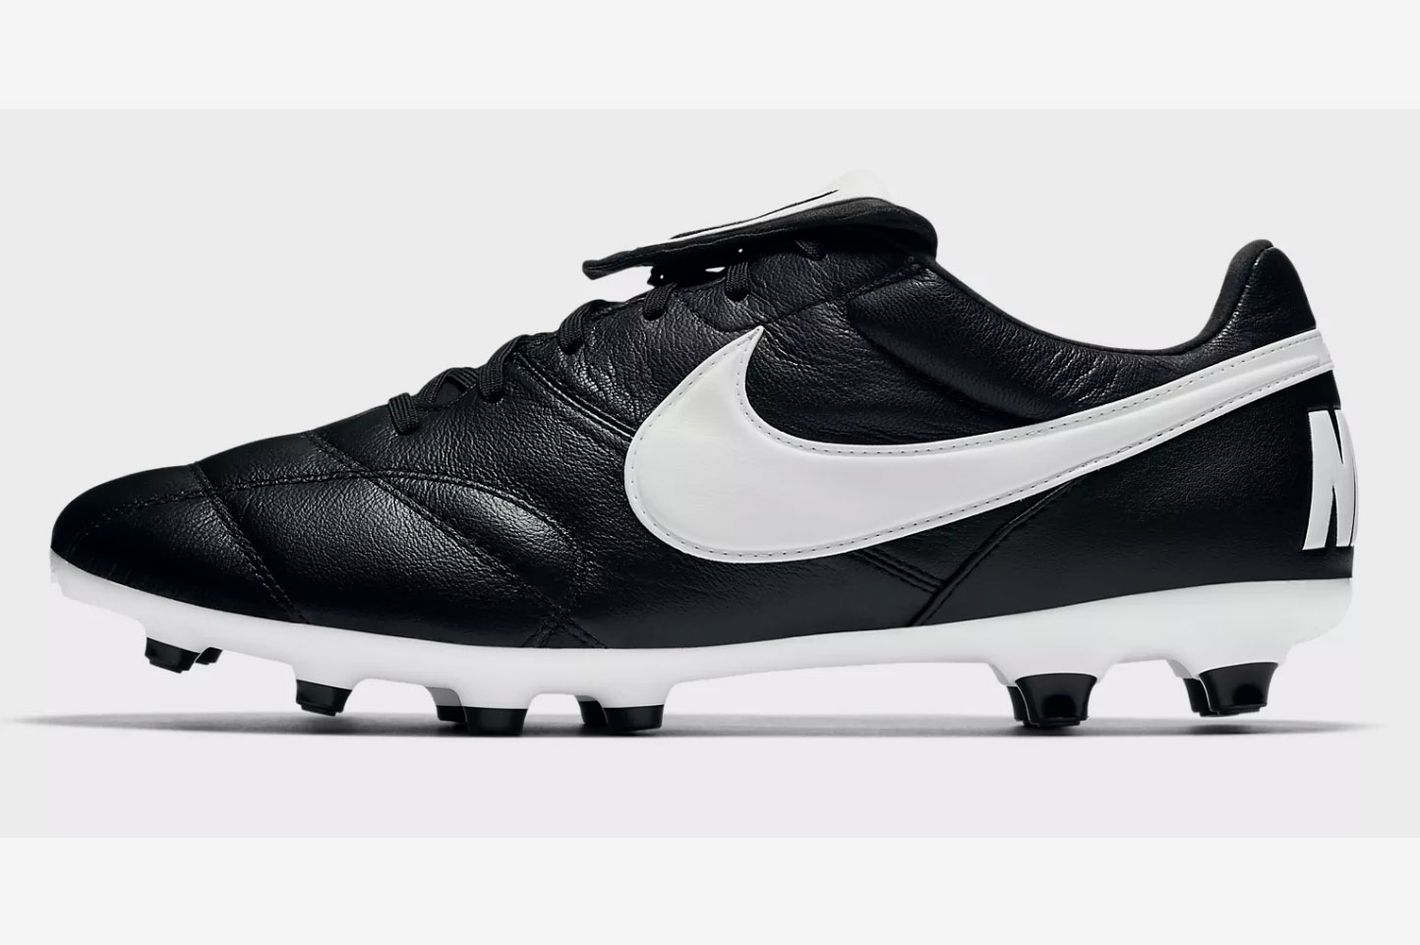 13 Best Soccer Cleats, Incl. Nike and 